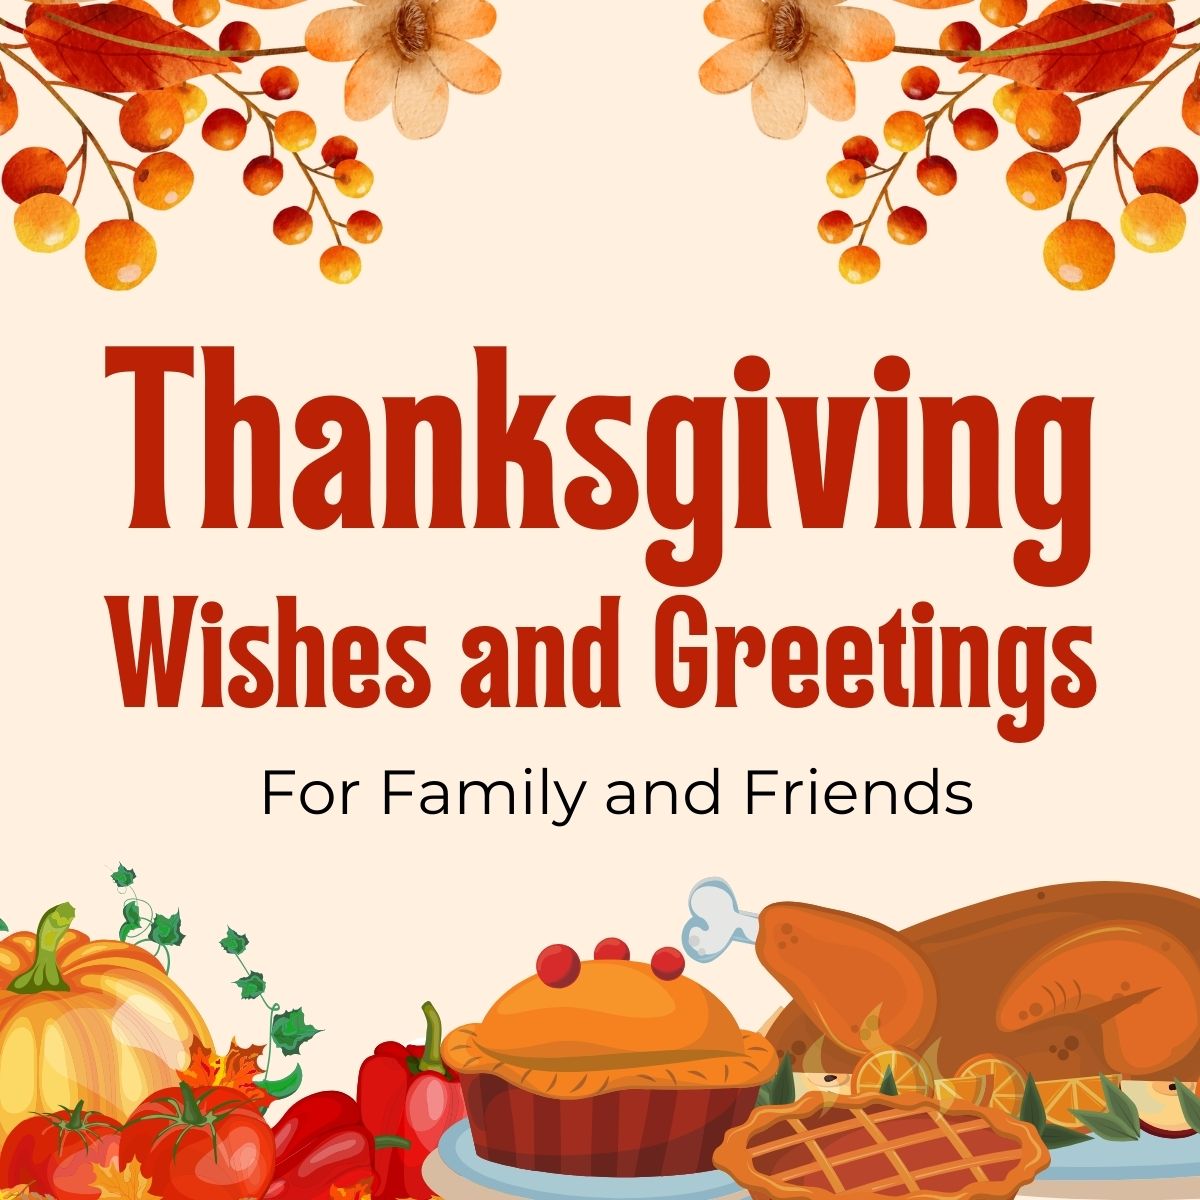 45 Thanksgiving Wishes and Greetings for Family and Friends